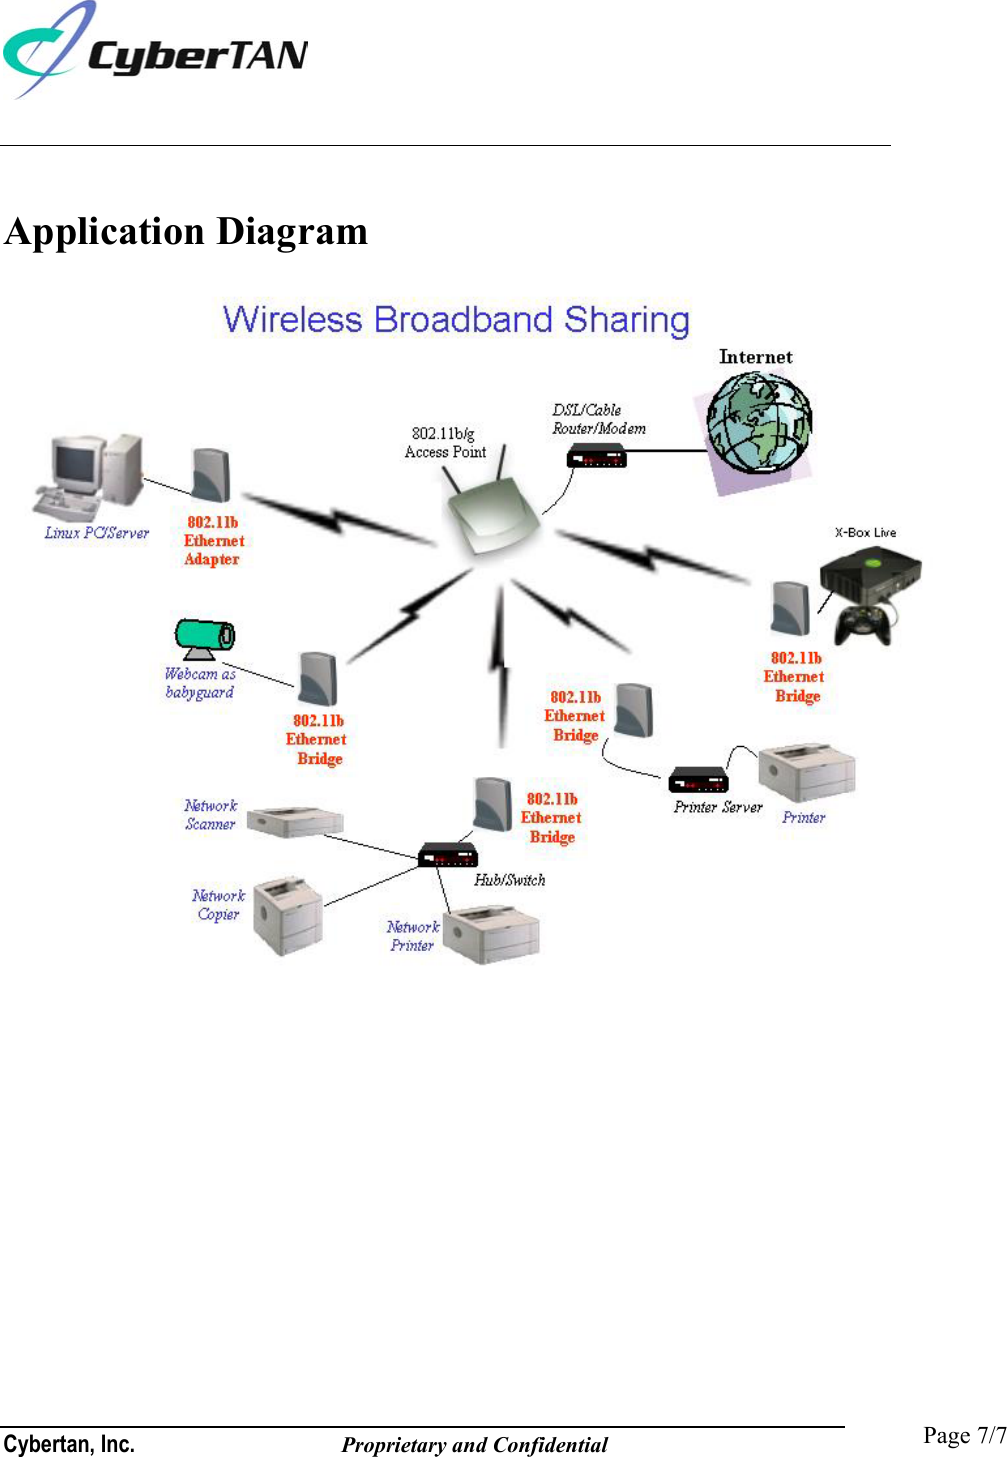  Cybertan, Inc.              Proprietary and Confidential   Page 7/7  Application Diagram  